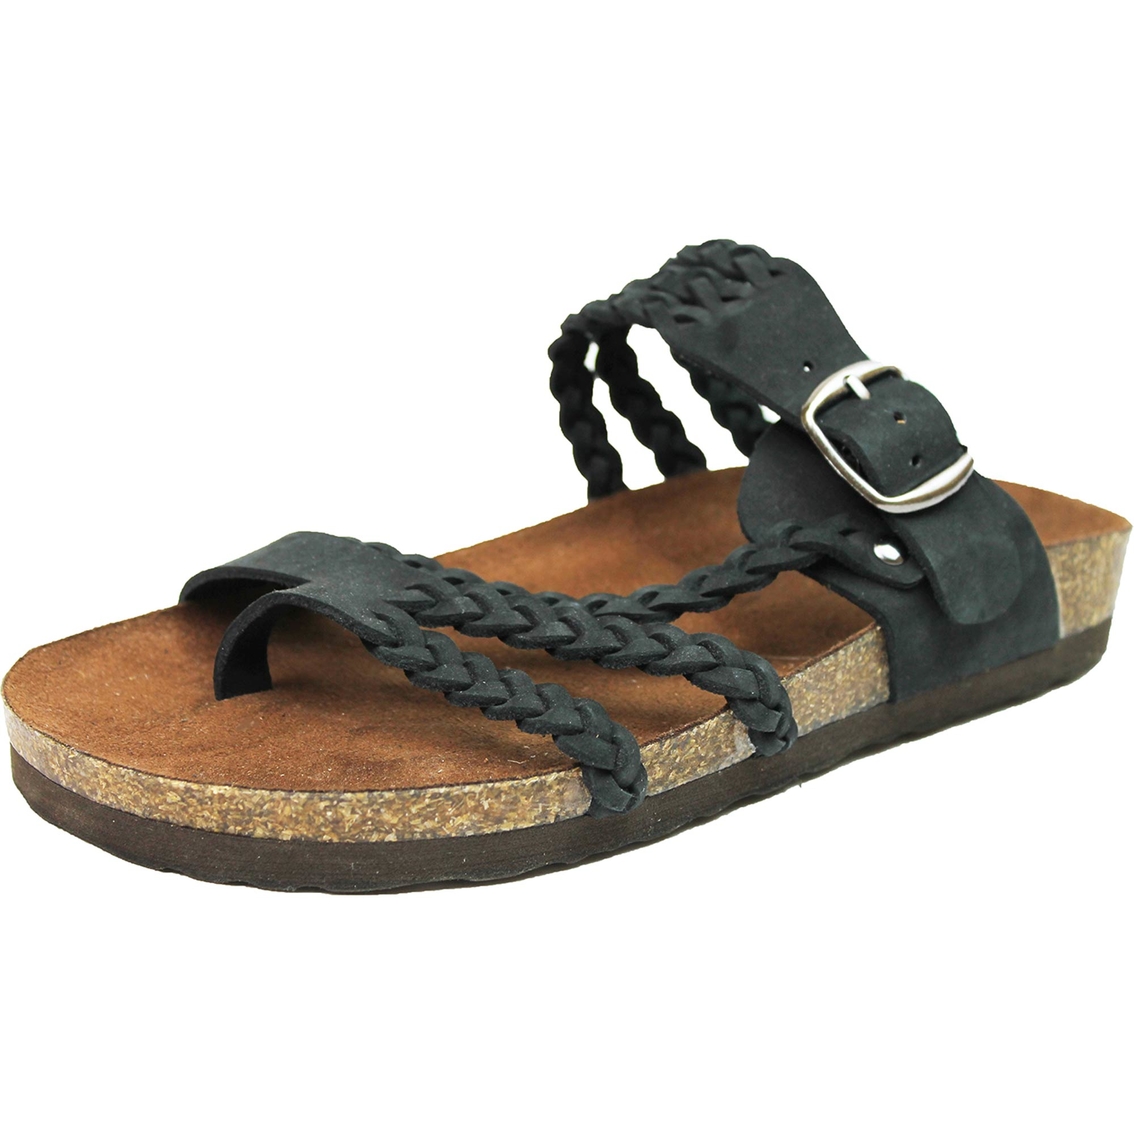 White Mountain Women's Hayleigh Leather Sandals | Sandals | Shoes ...